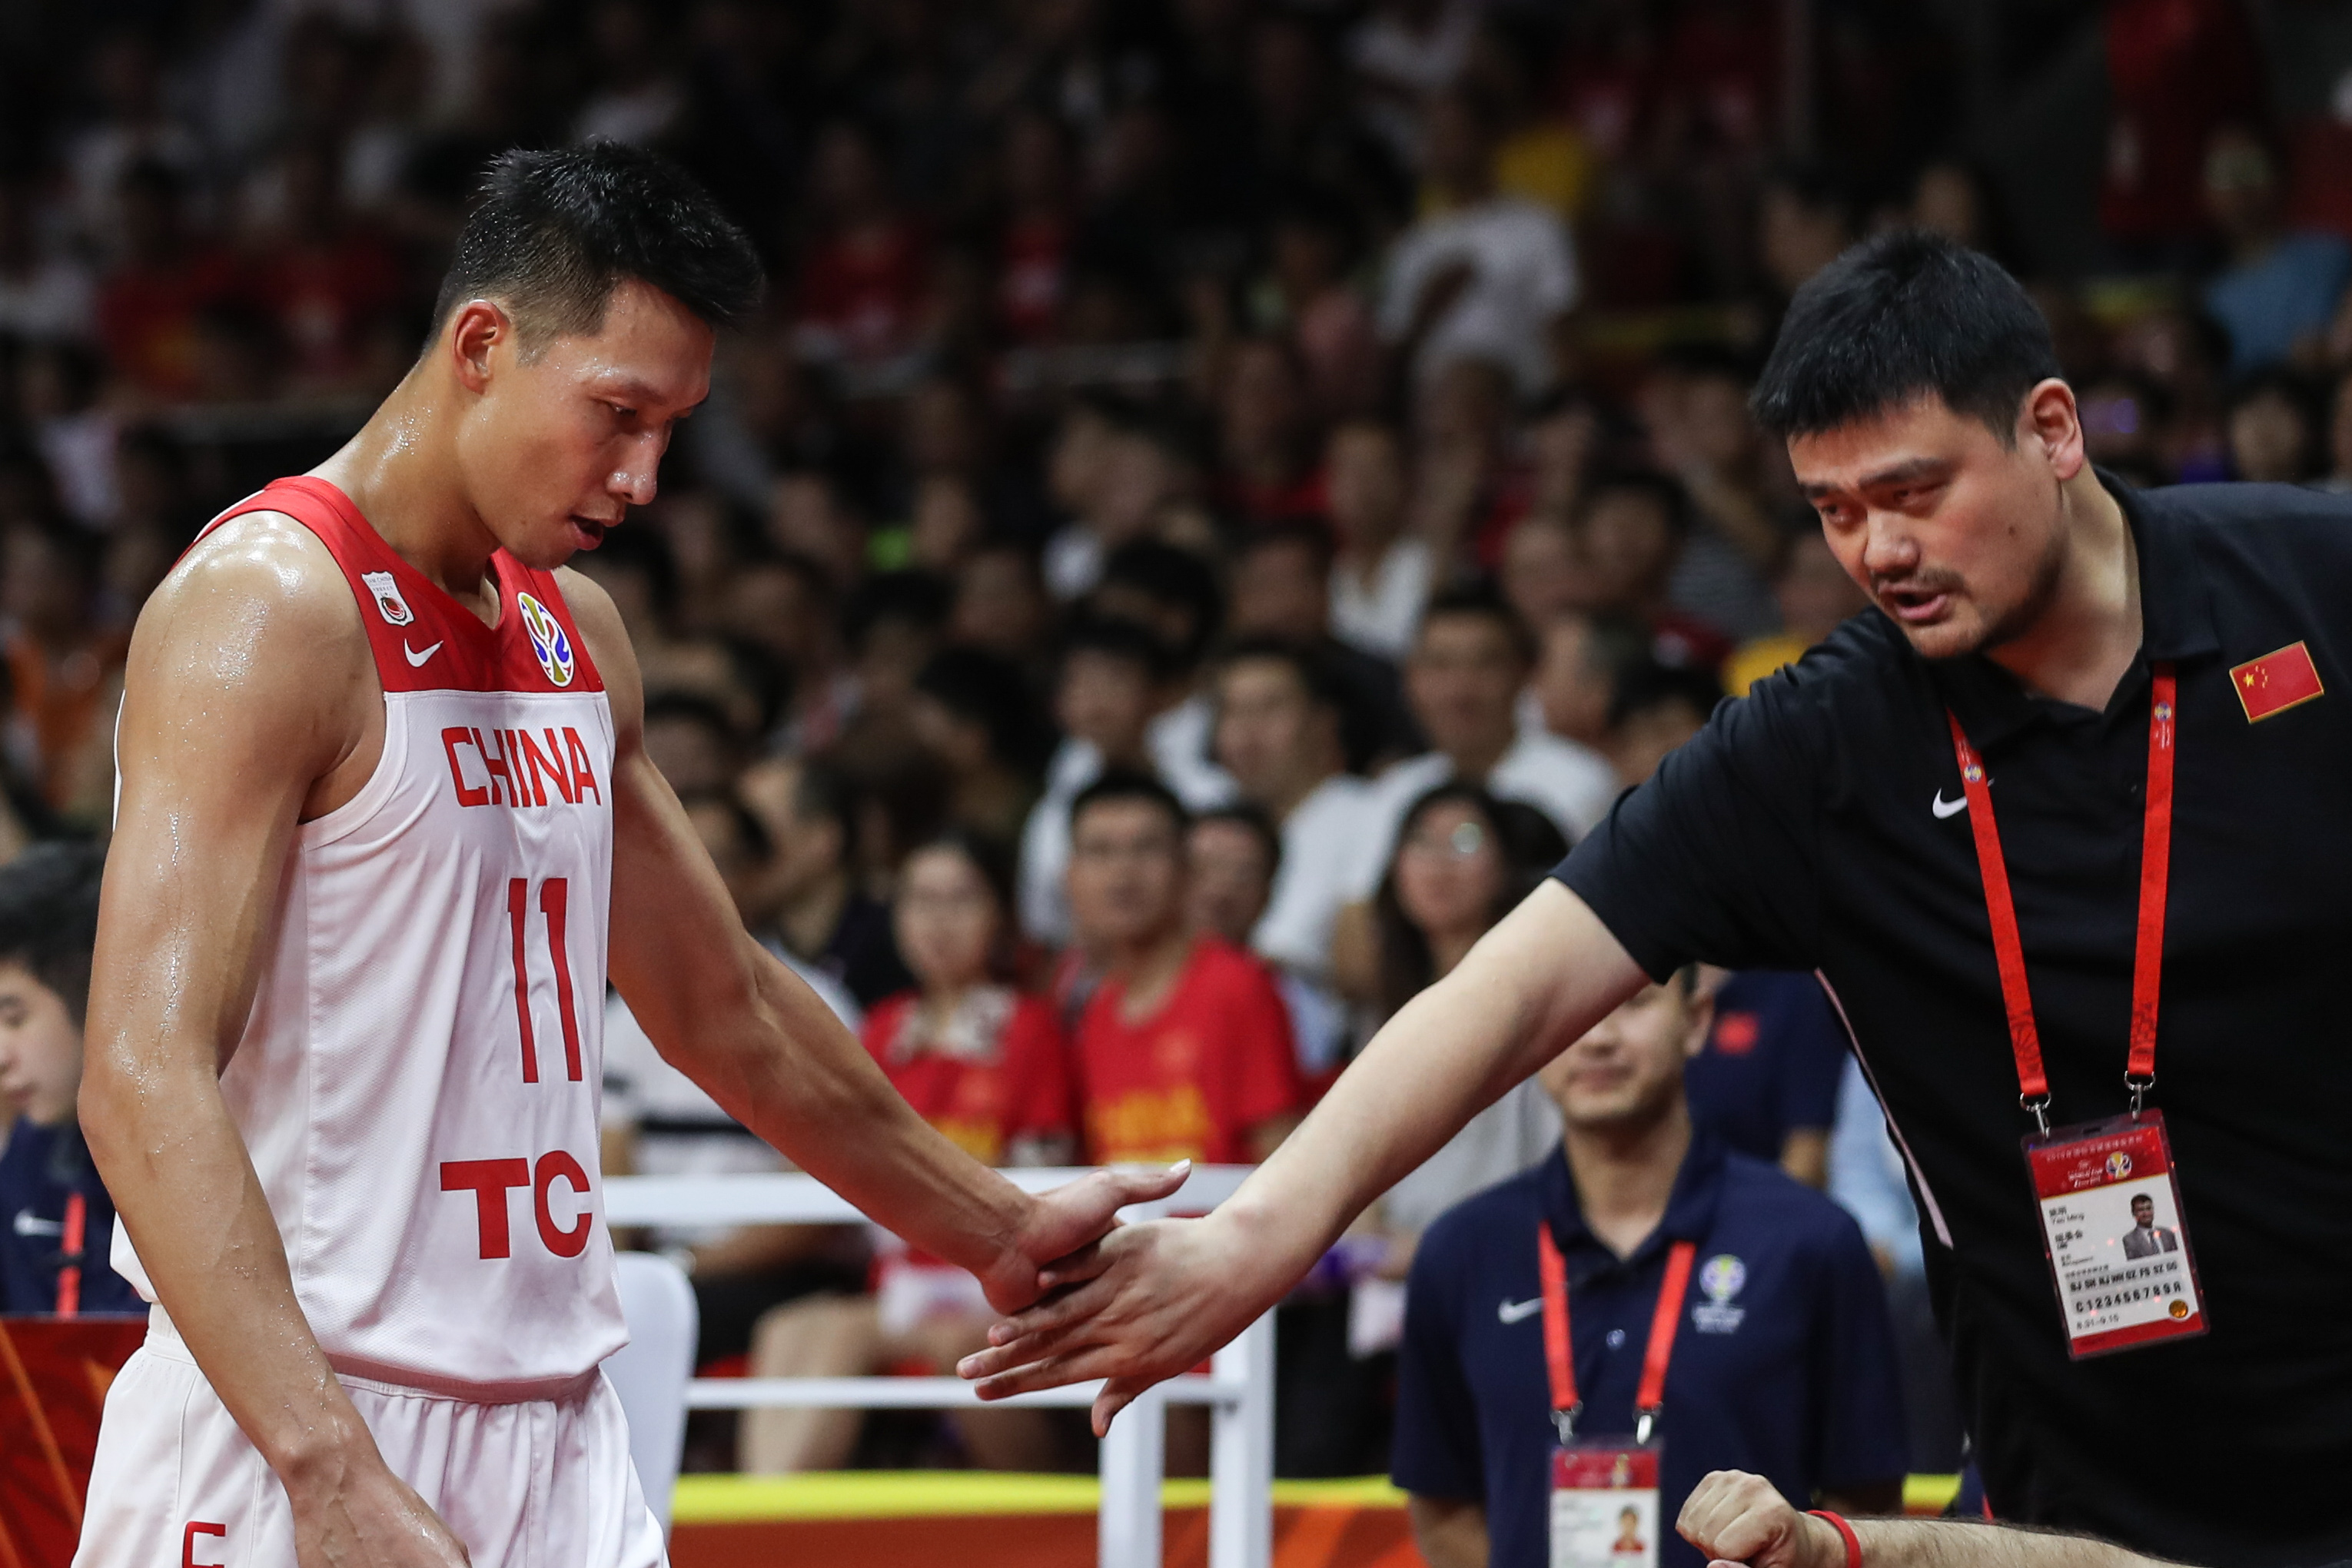 Yao Ming: I take all the responsibility for China's performance in FIB...